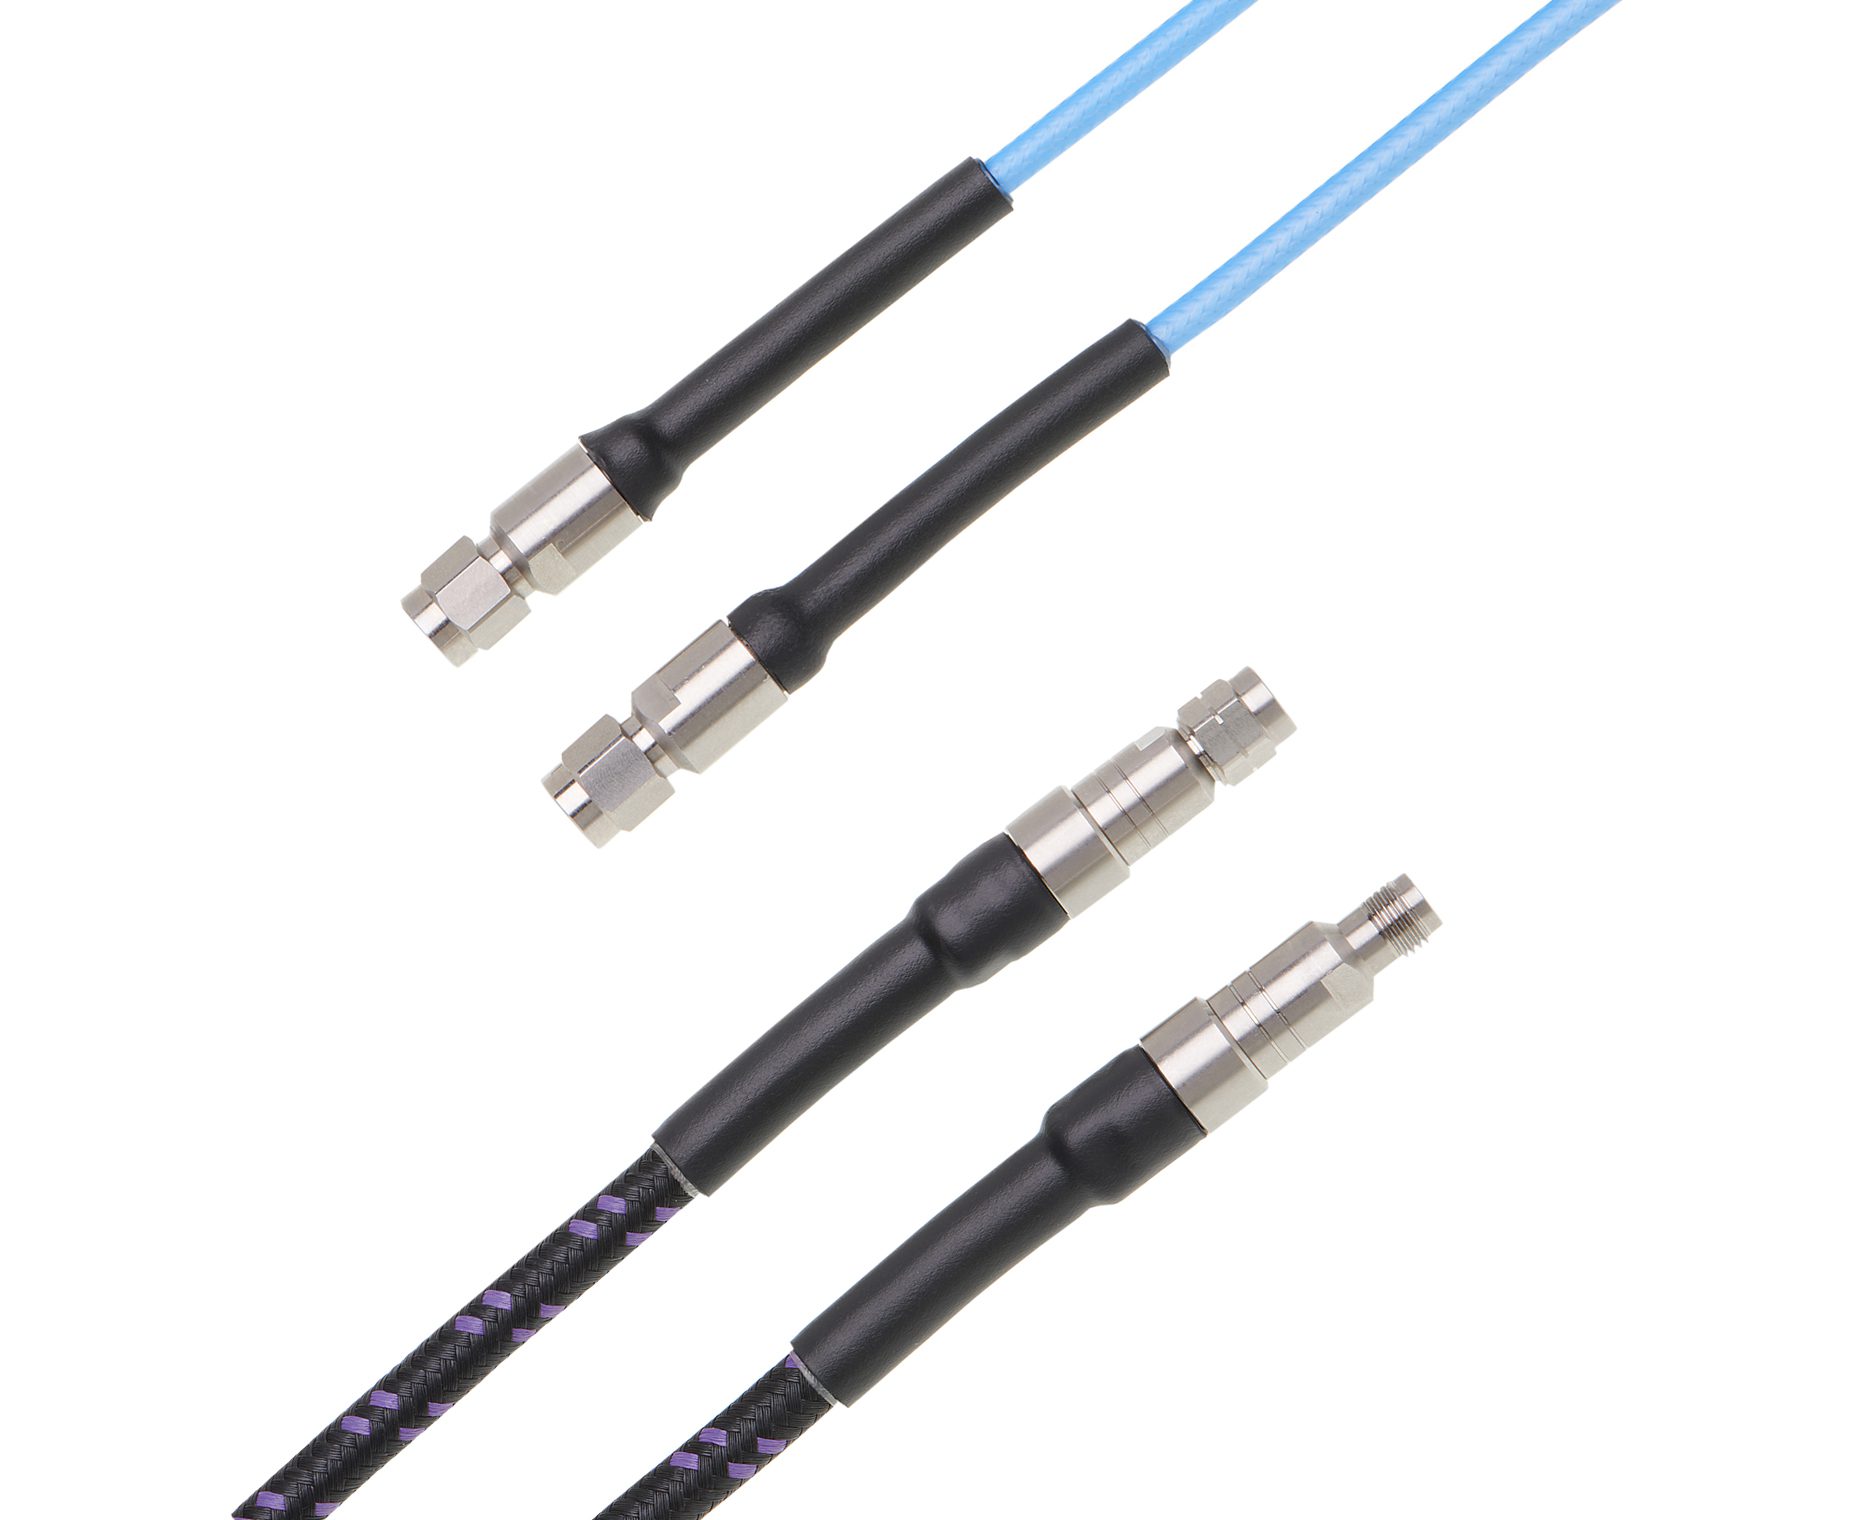 The new Cardinal line of high-performance cable assemblies from Molex